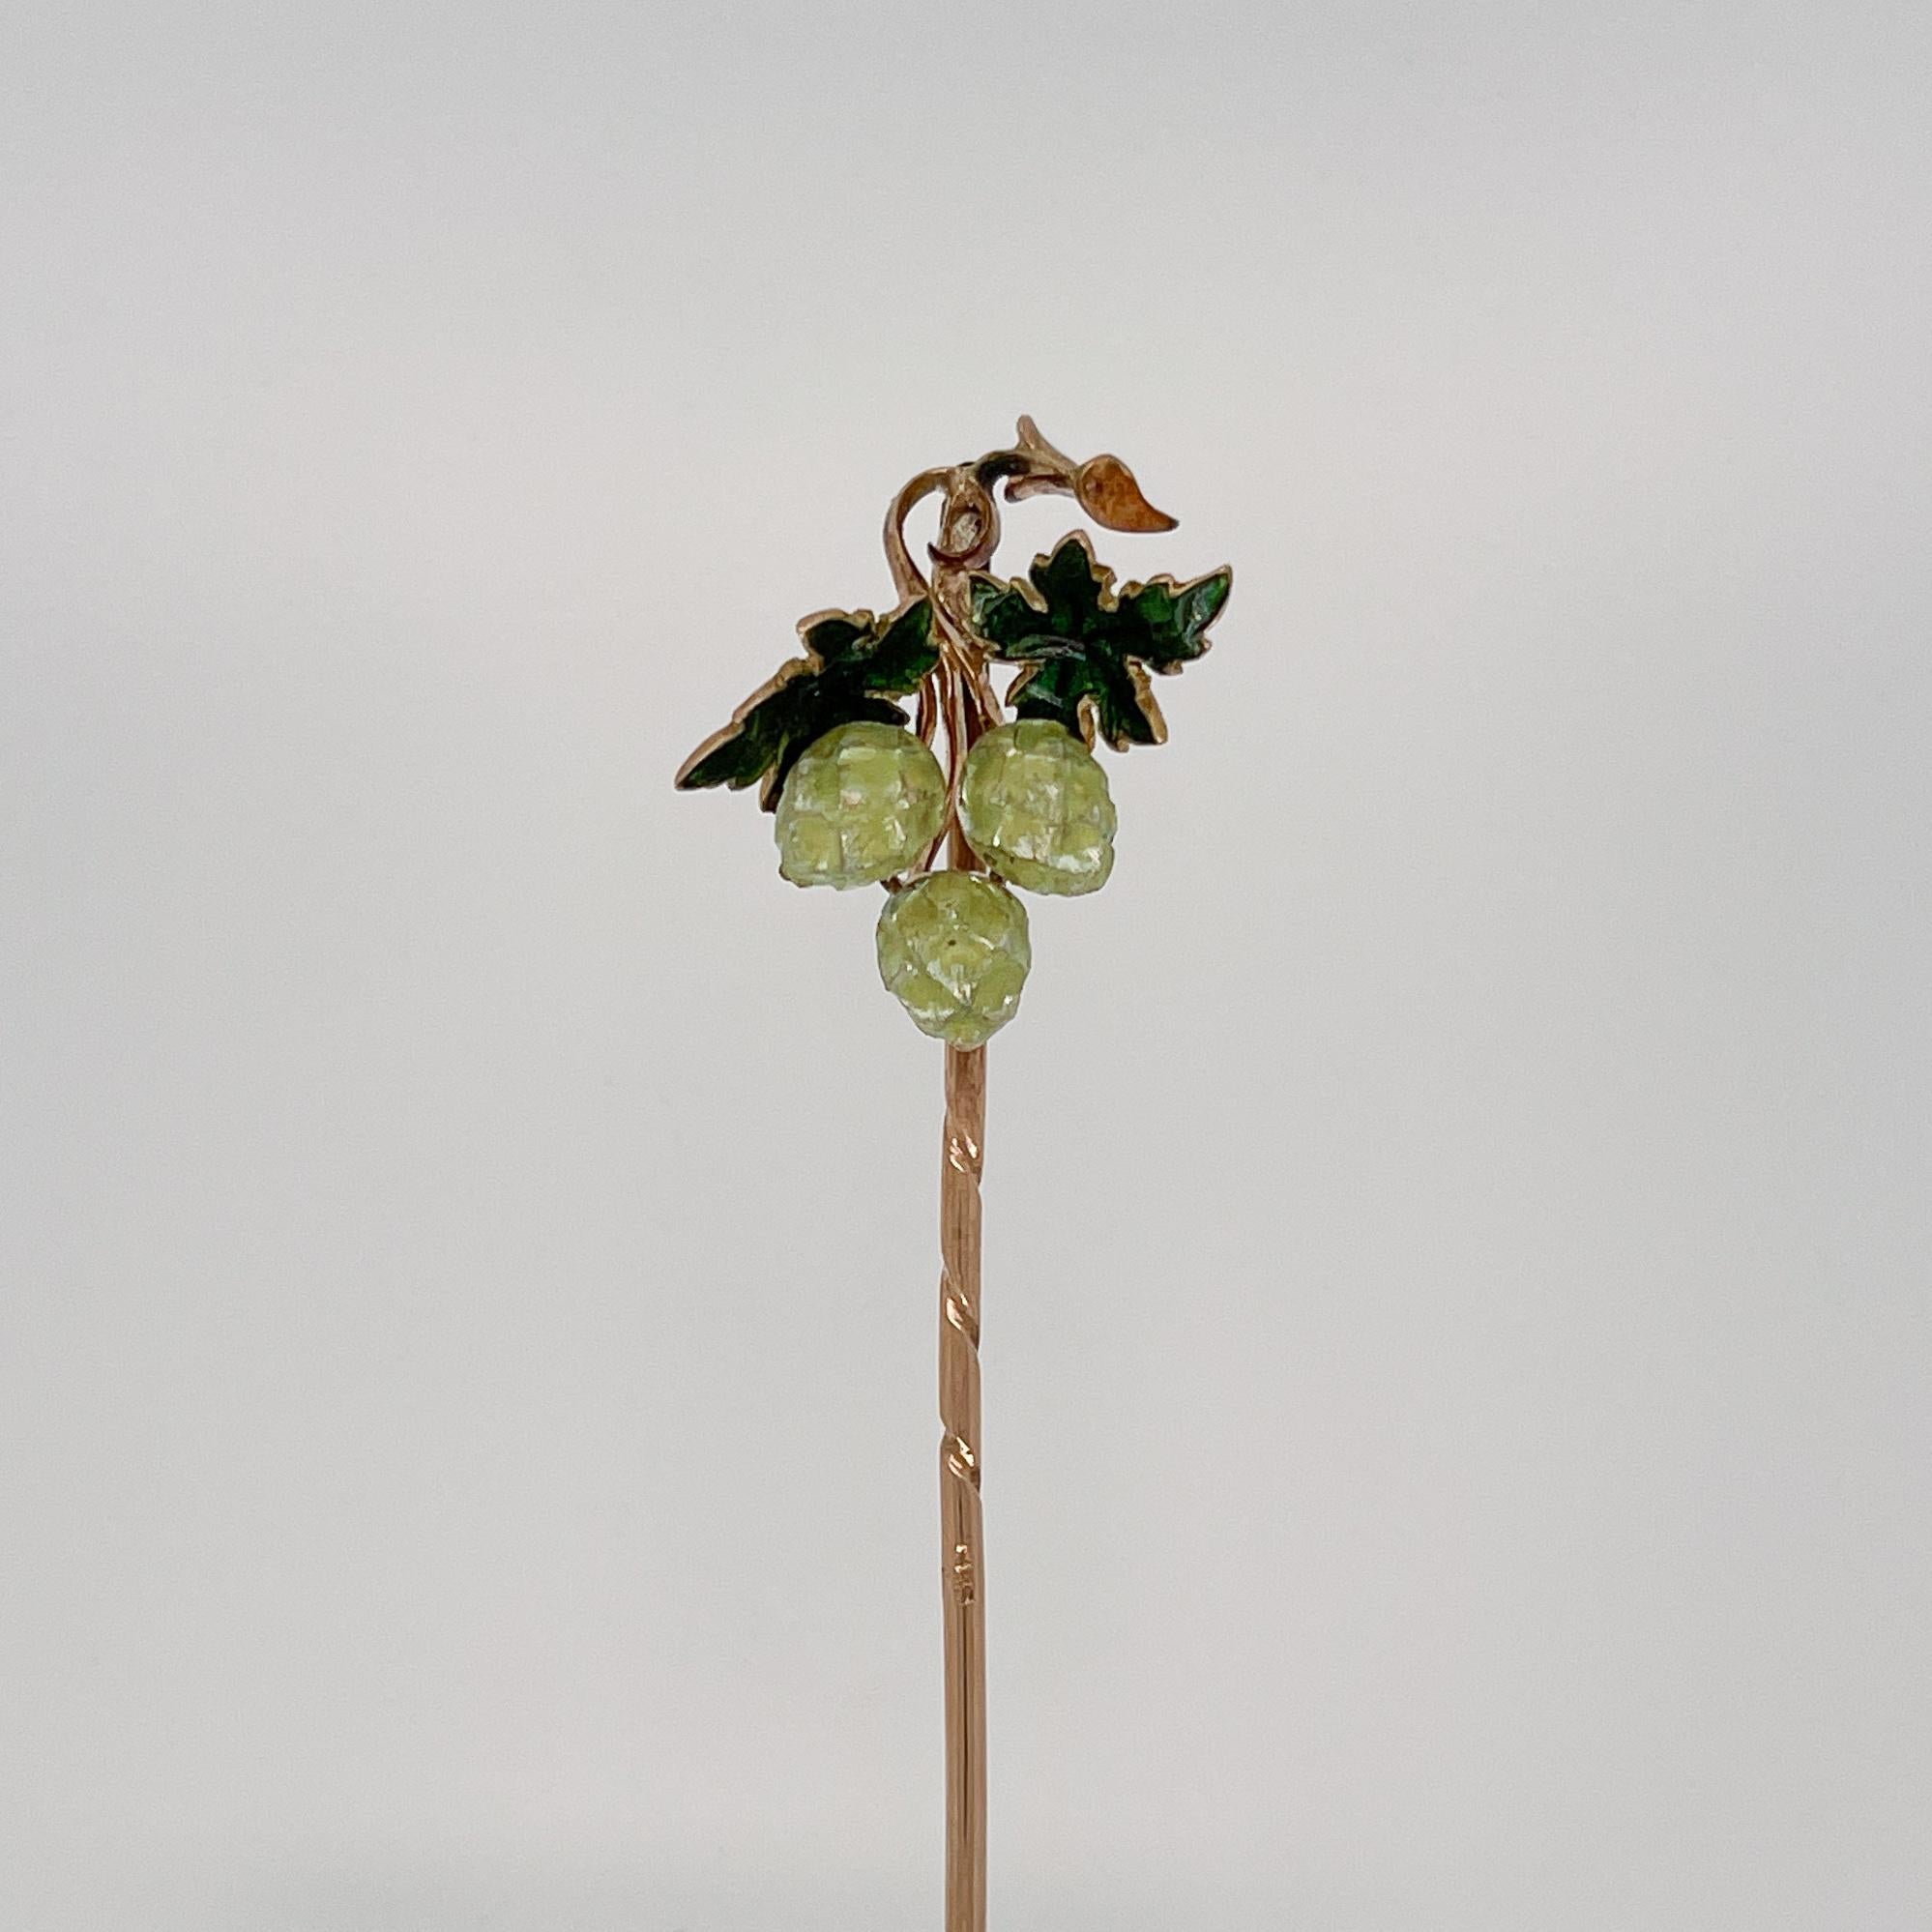 A very fine 14k gold and enameled hop seed (or flower) stickpin.

With enameled 14k gold hop seeds and leaves.

Simply a great stickpin for the beer lover!

Date:
Late 19th Century or Early 20th Century

Overall Condition:
It is in overall good,